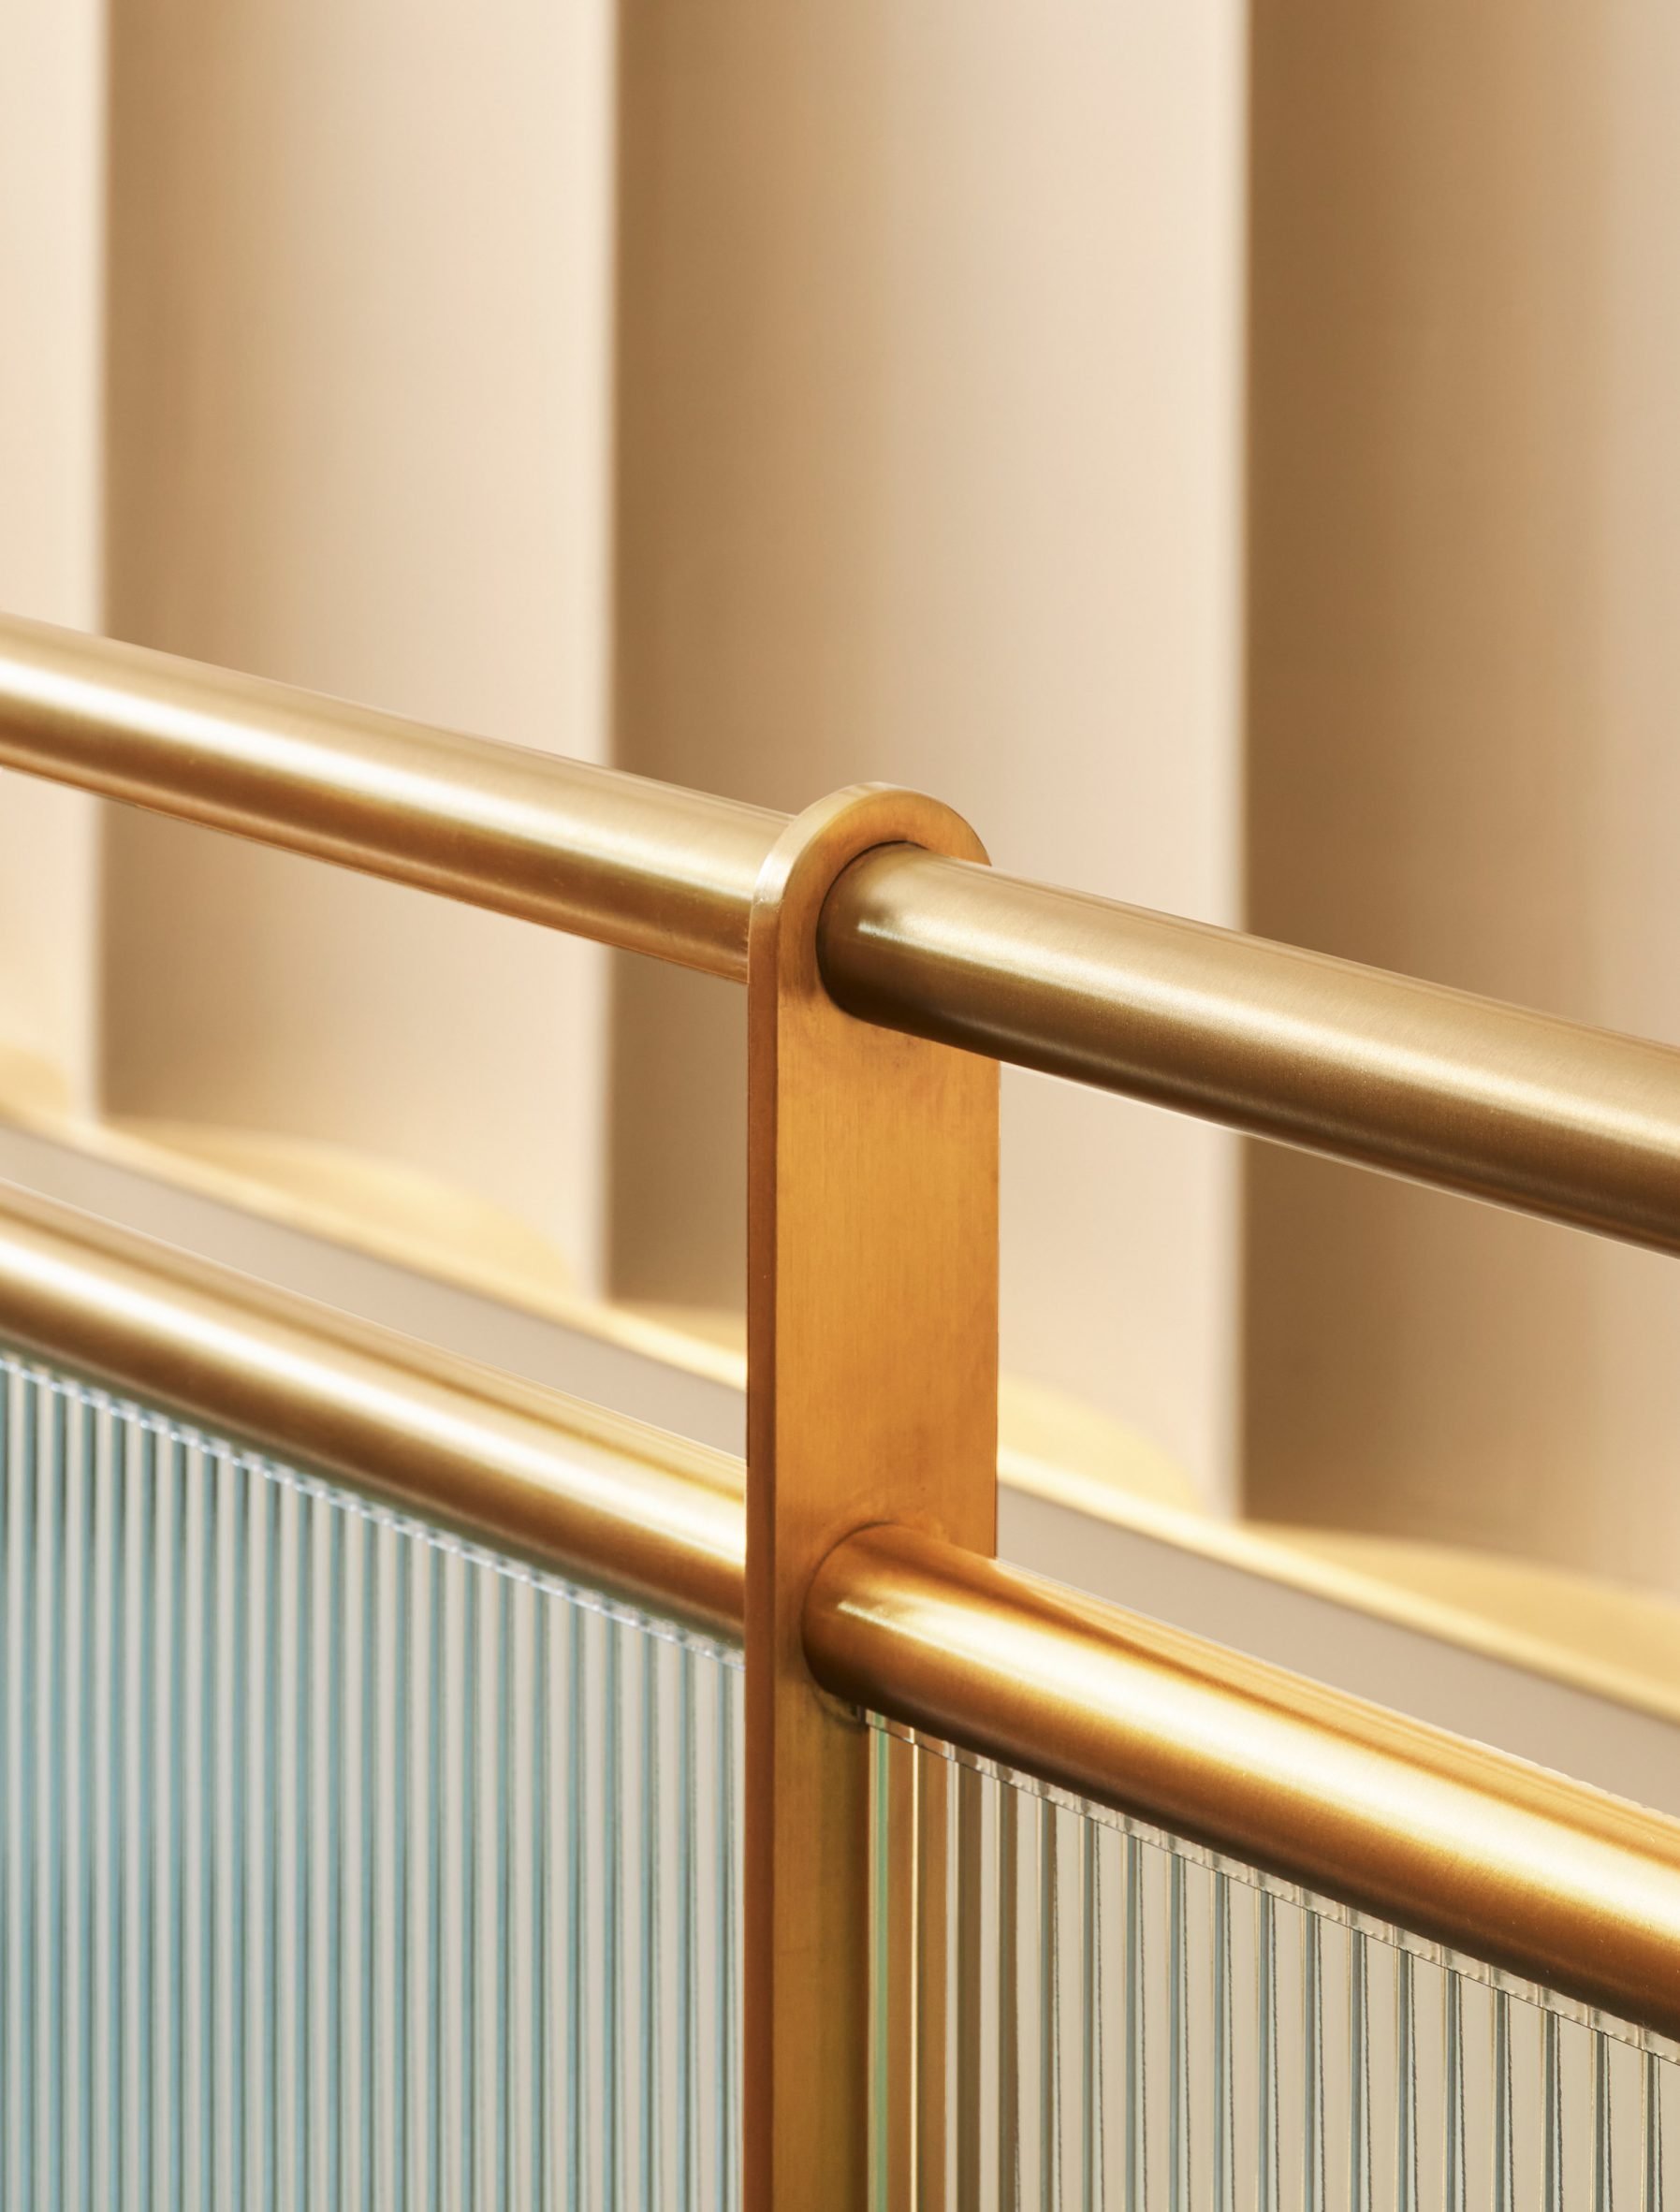 Detail of brass railing with fritted glass partitions